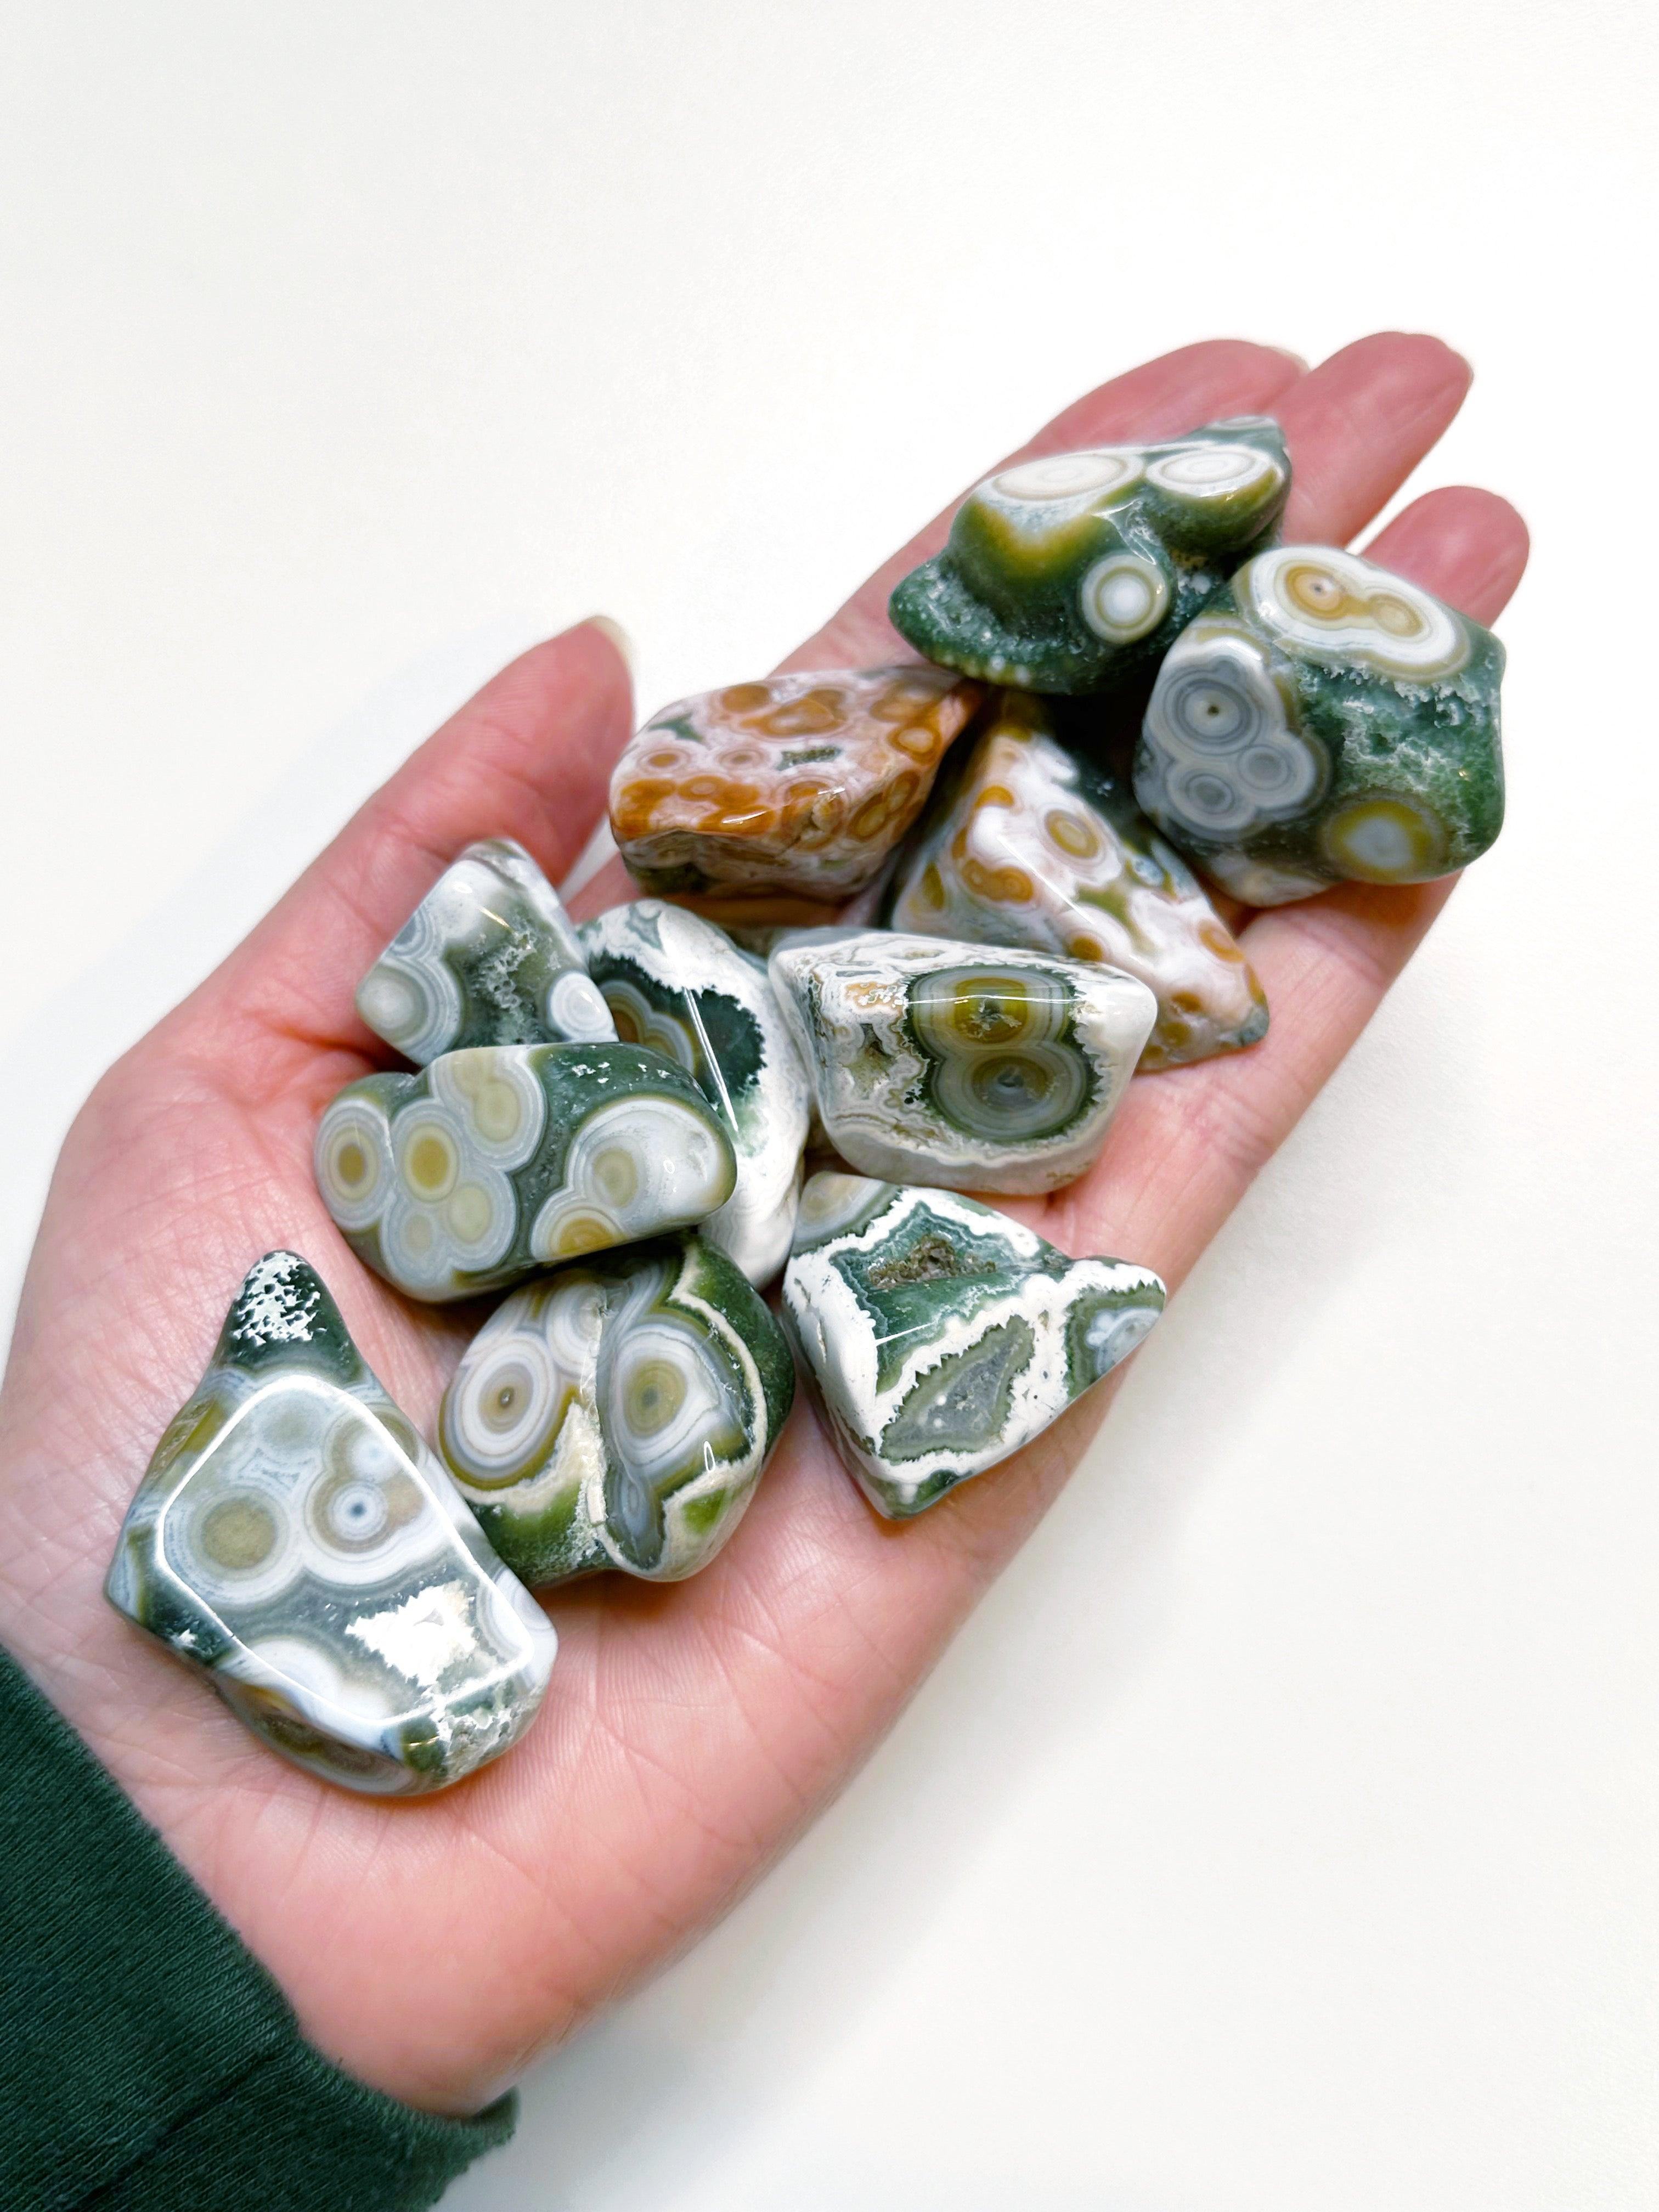 8TH VEIN OCEAN JASPER TUMBLE (EXTRA GRADE) - 8th vein, emotional support, end of year sale, ocean jasper, pocket crystal, pocket stone, recently added, tumble - The Mineral Maven